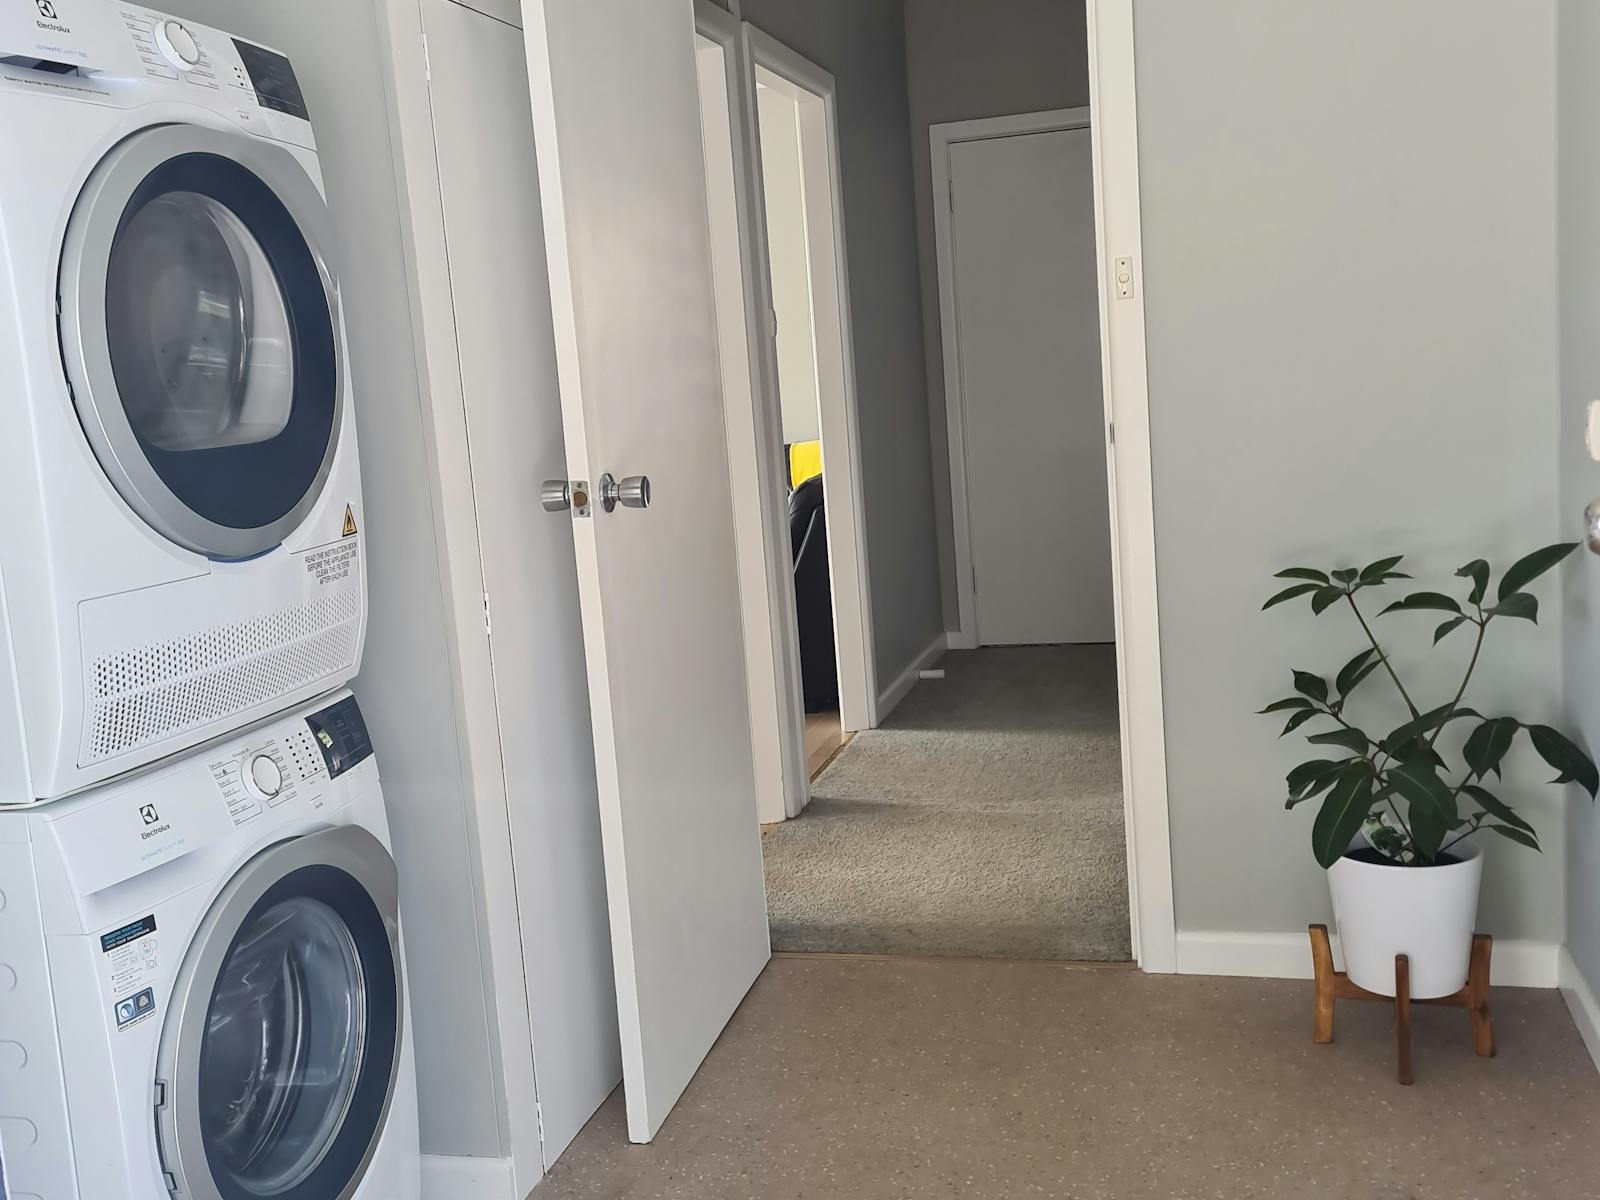 Laundry facilities - washing machine and dryer. Clothes line also available